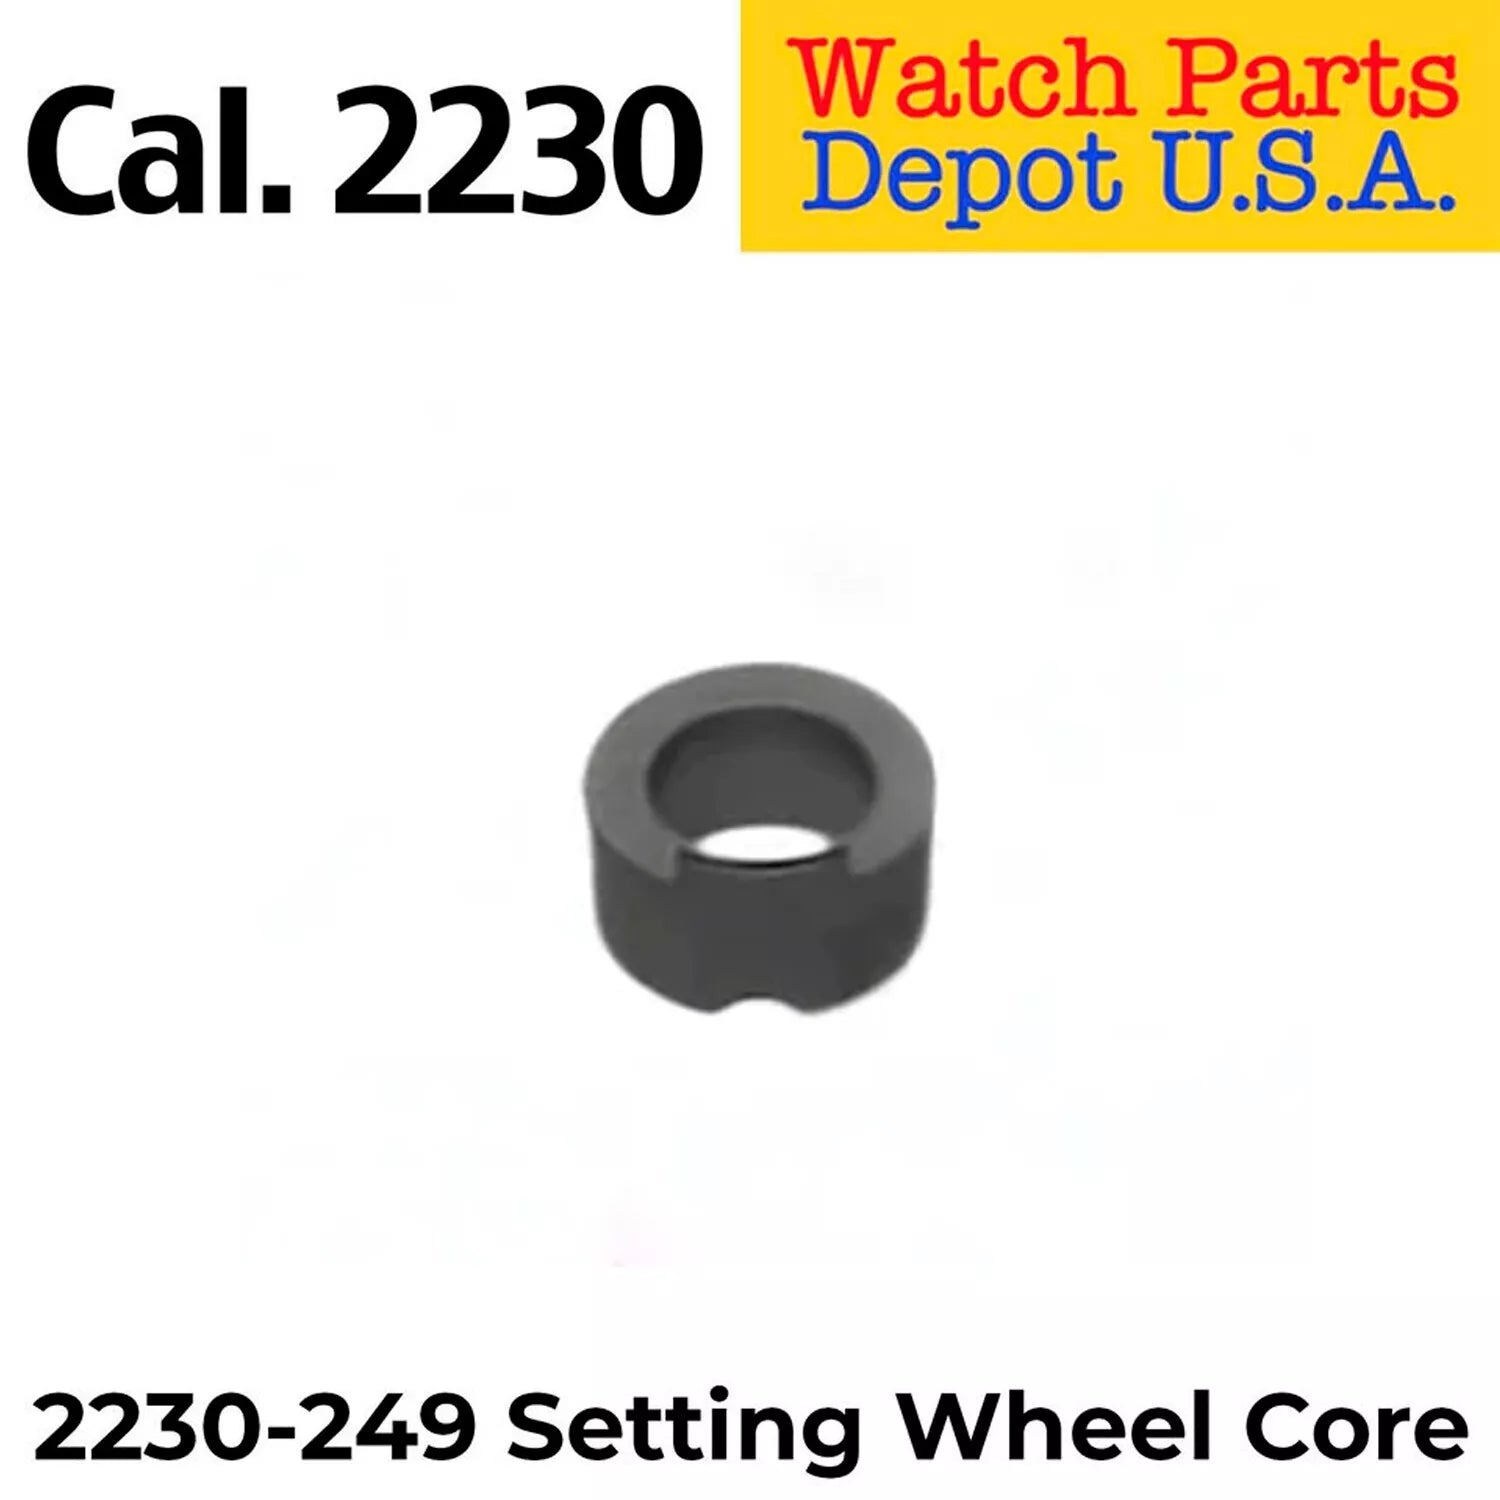 Internal Parts to fit Rolex 22 Series Calibers 2230, 2235, 2236